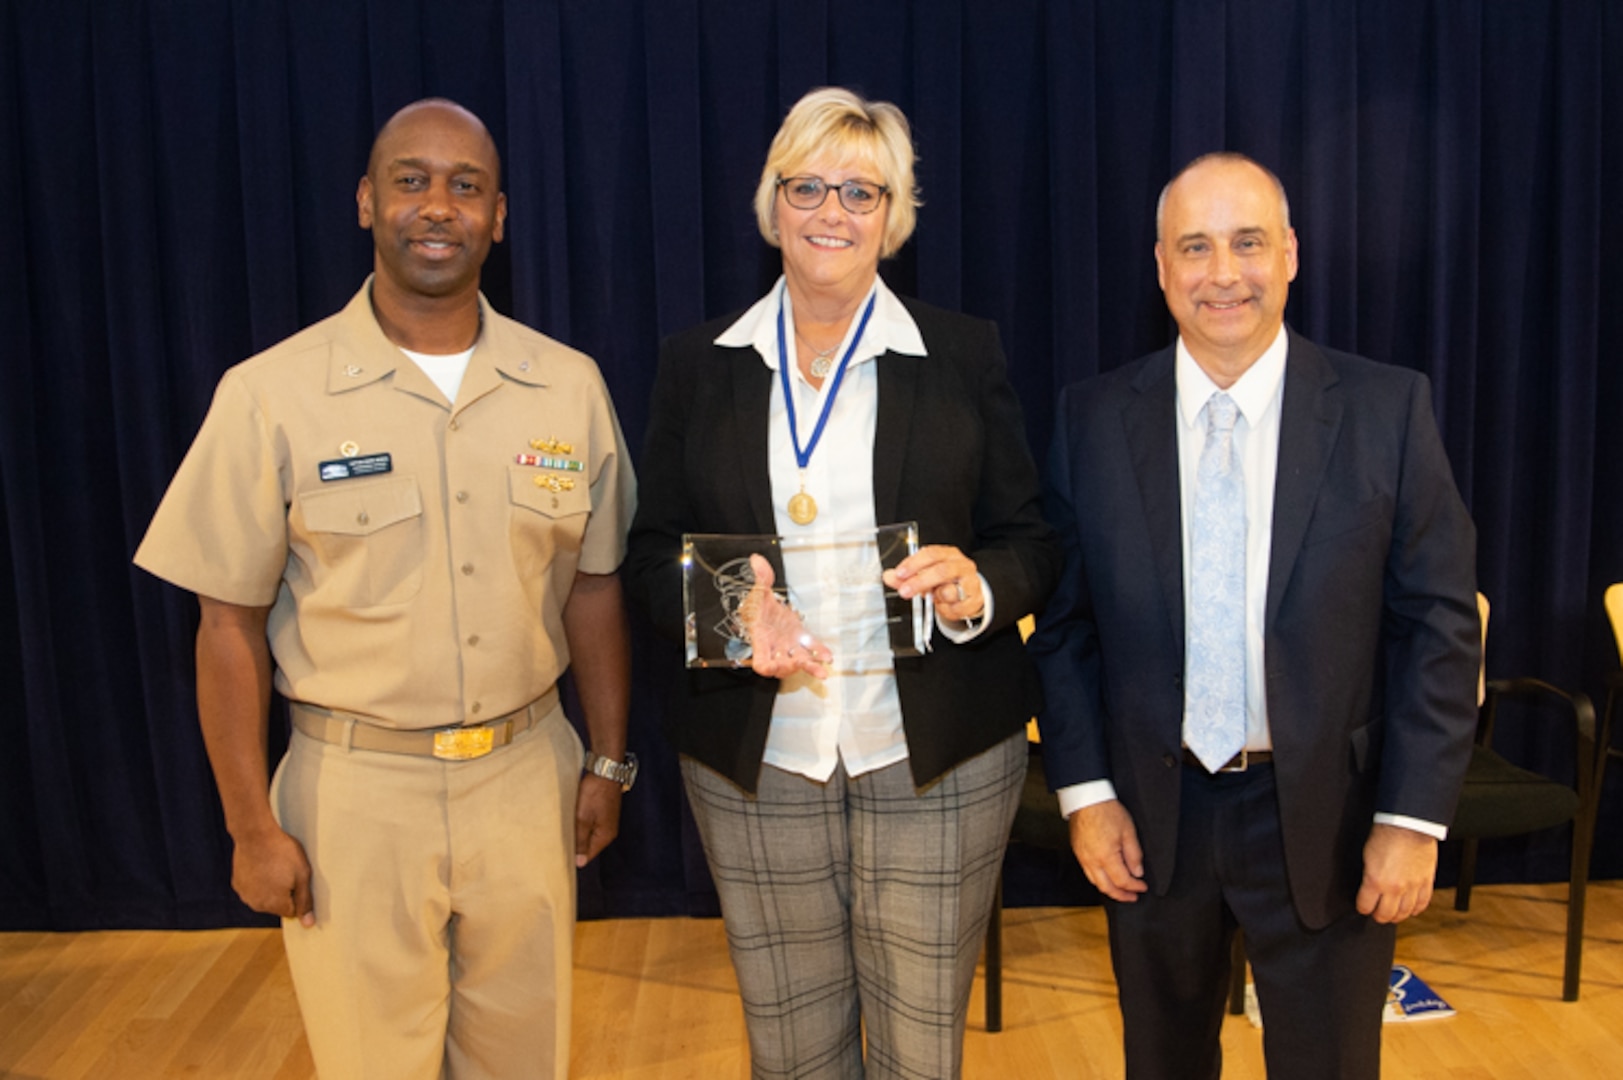 Chief of Staff Kathy Stanley receives the Vice Adm. Samuel Gravely Award during the Naval Surface Warfare Center, Carderock Division Honor Awards on Sept. 10, 2019, in West Bethesda, Md. With Stanley is Commanding Officer Capt. Cedric McNeal and Technical Director Larry Tarasek. (U.S. Navy photo by Nicholas Brezzell/Released)